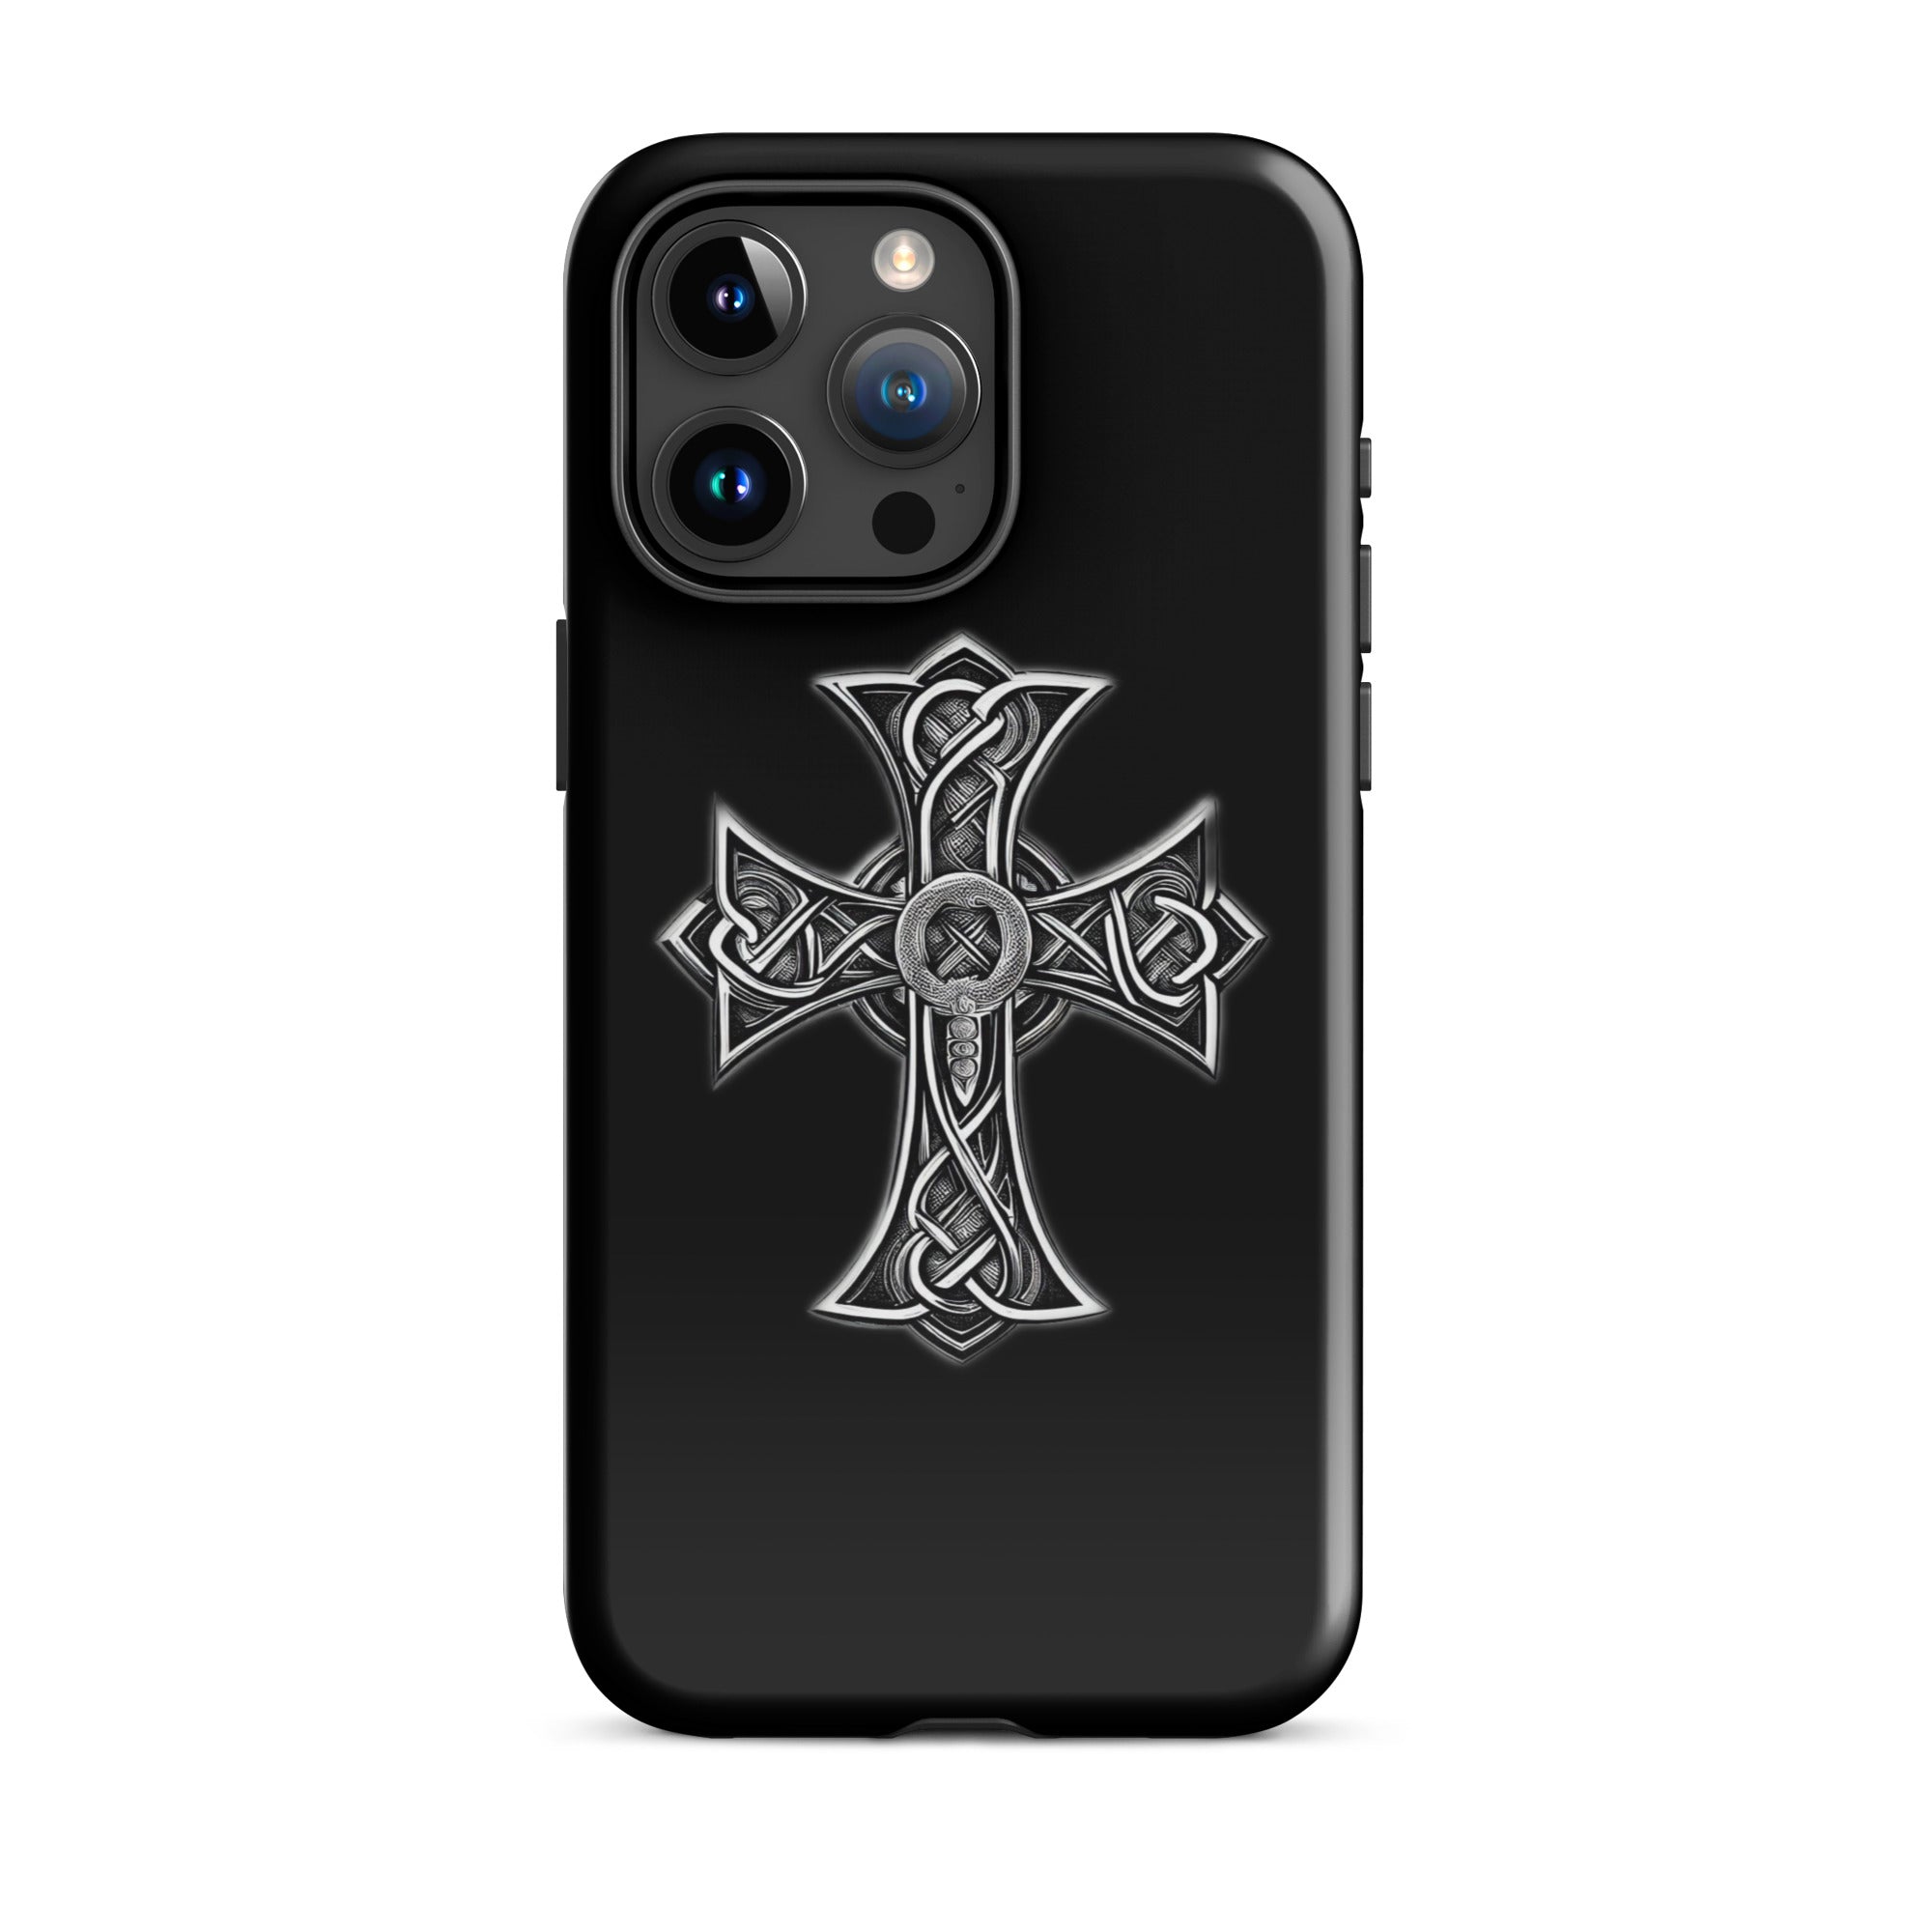 tough-case-for-iphone-glossy-iphone-15-pro-max-front-6563851a35513.jpg